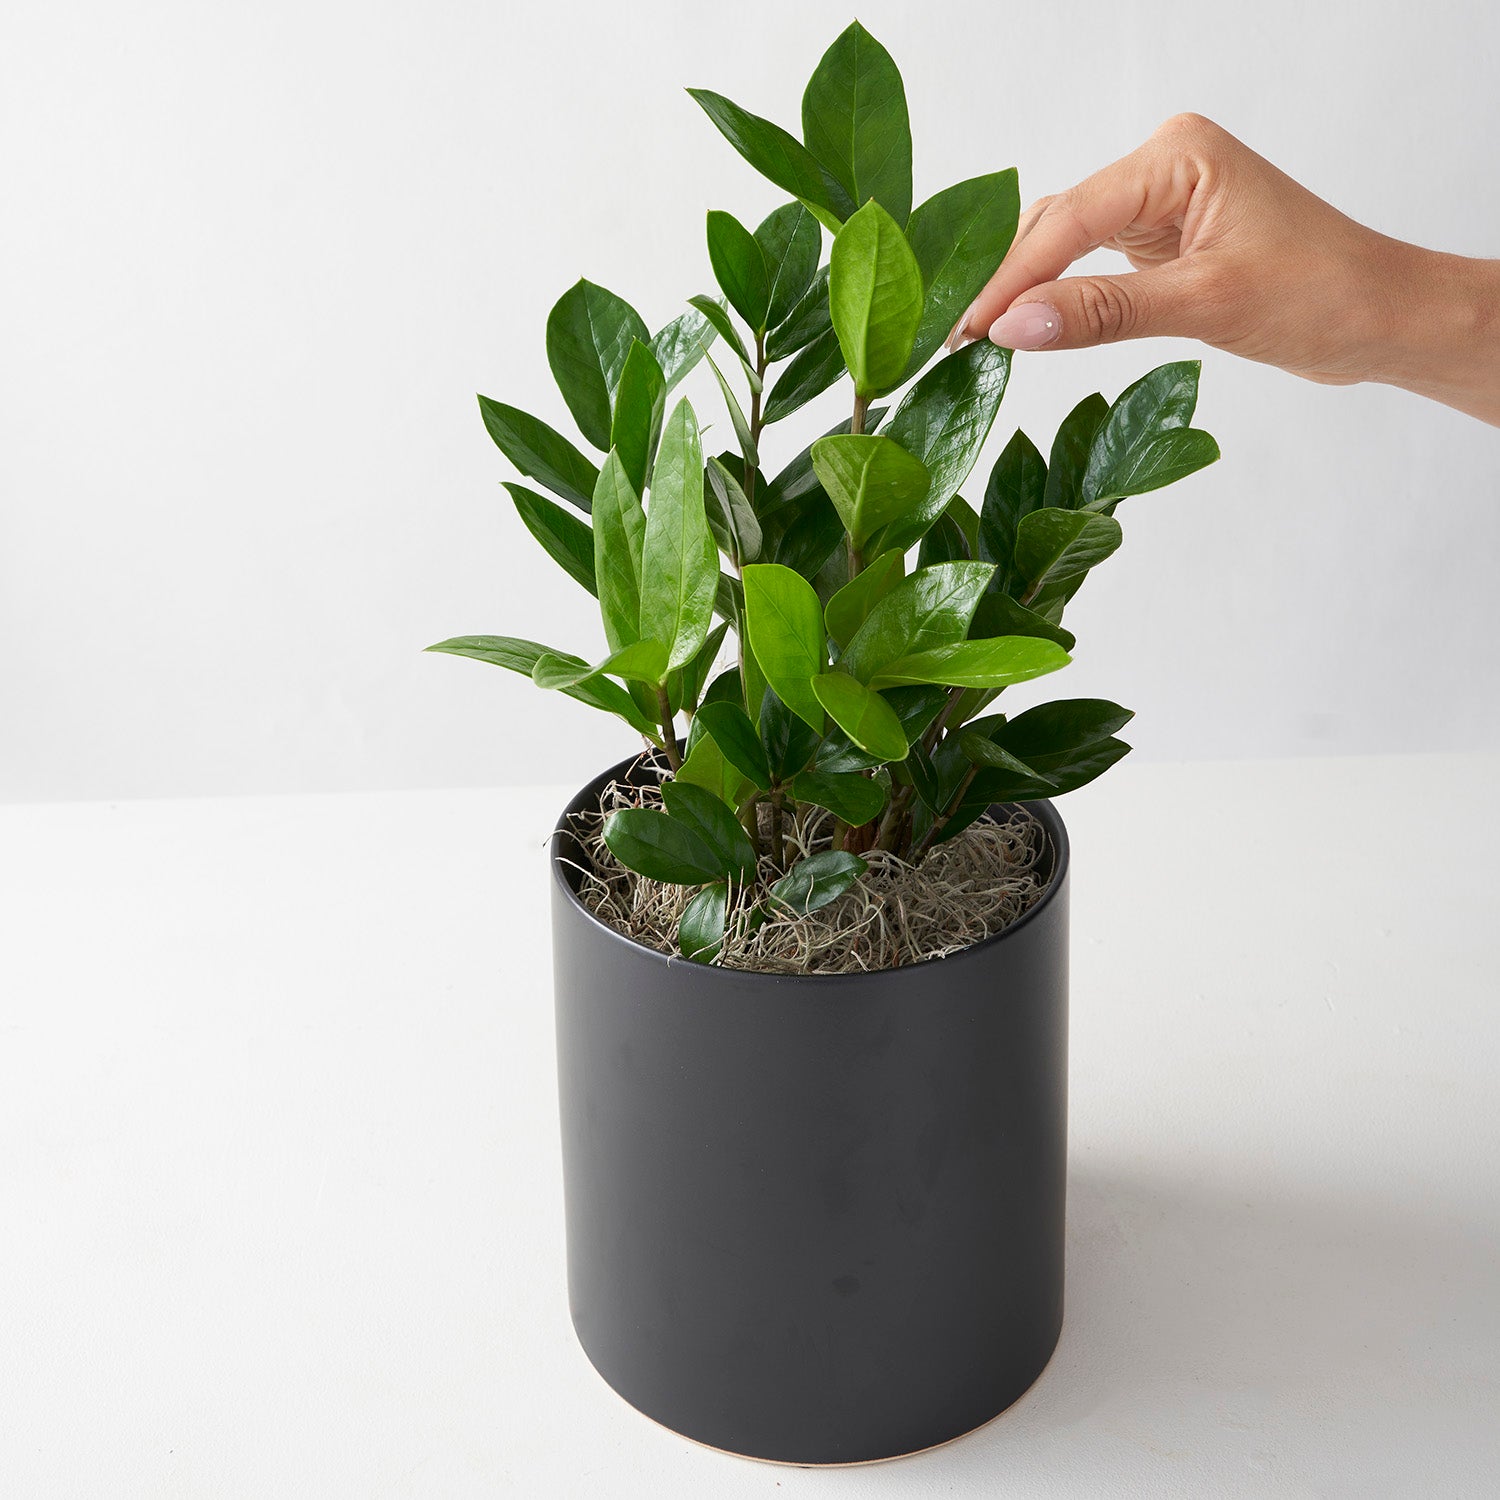 Woman's hand touching leaf of ZZ plant in round ceramic container.